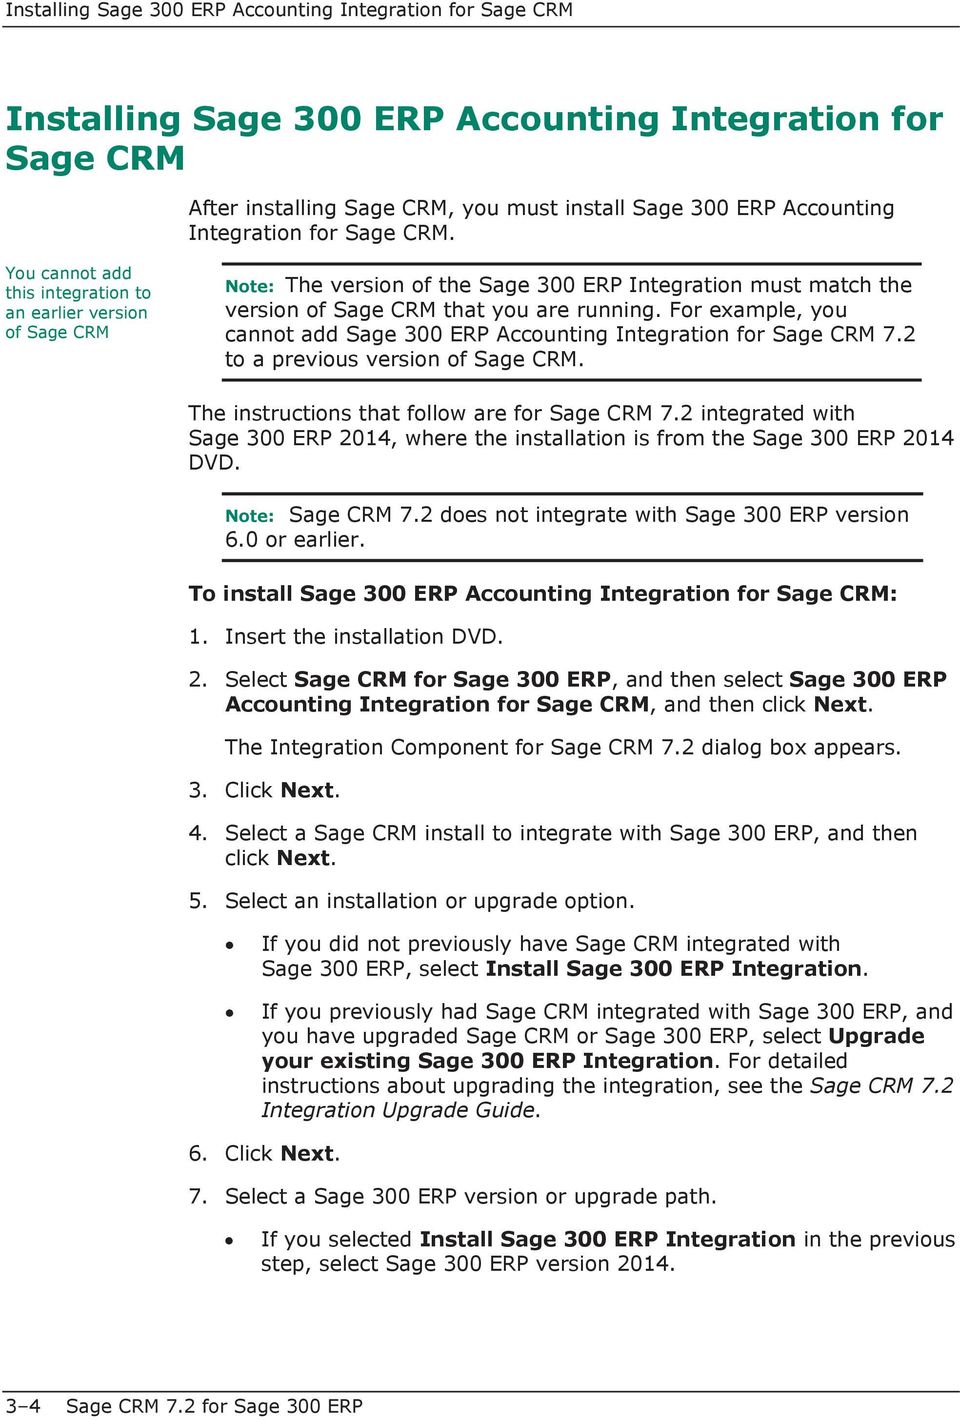 For example, you cannot add Sage 300 ERP Accounting Integration for Sage CRM 7.2 to a previous version of Sage CRM. The instructions that follow are for Sage CRM 7.